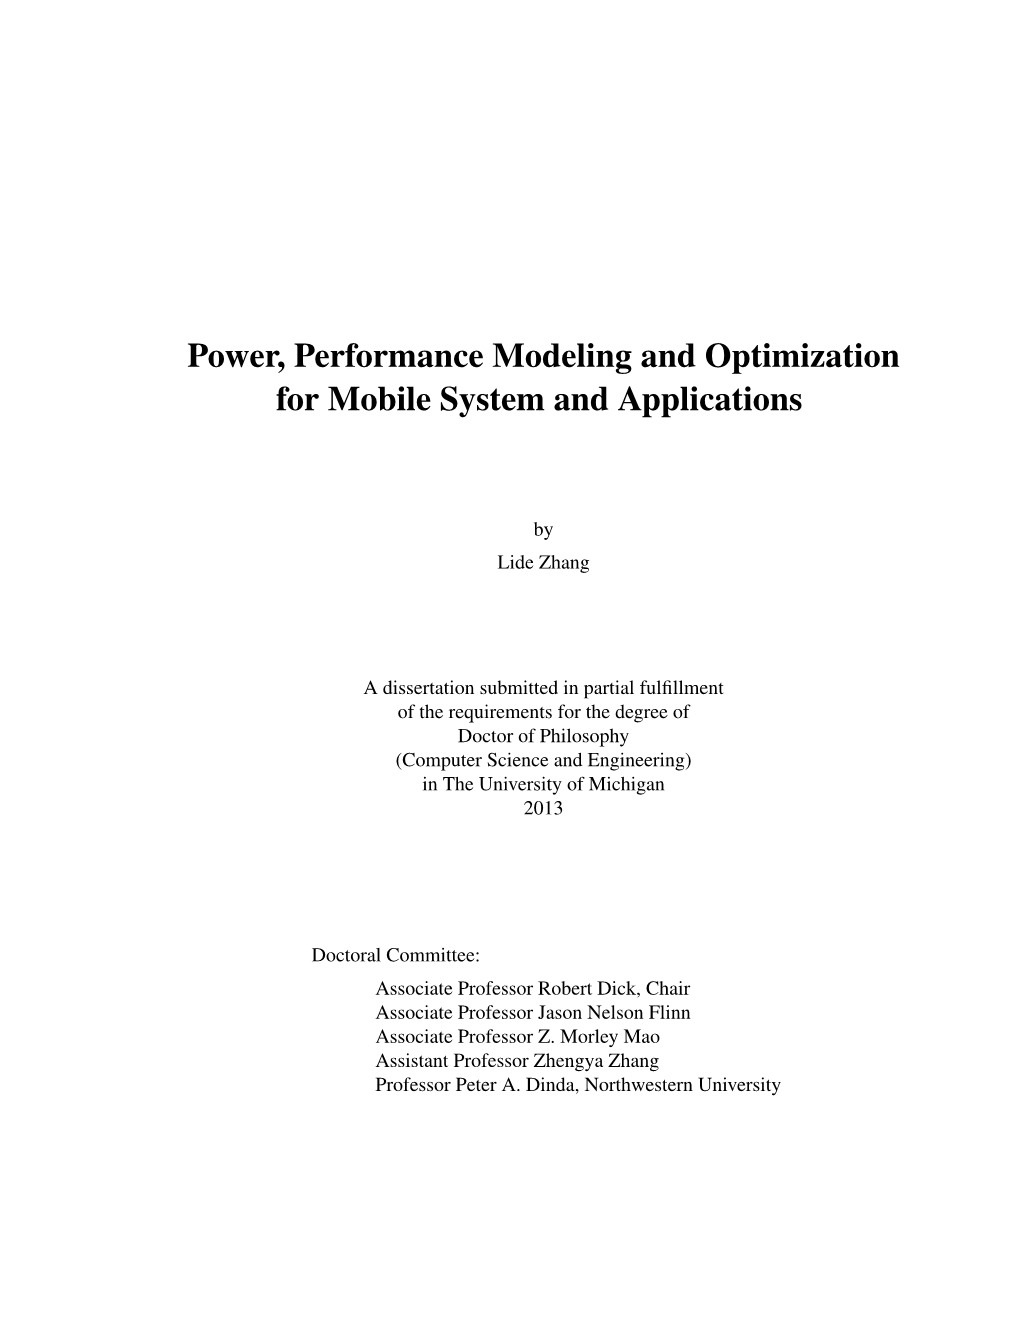 Power, Performance Modeling and Optimization for Mobile System and Applications